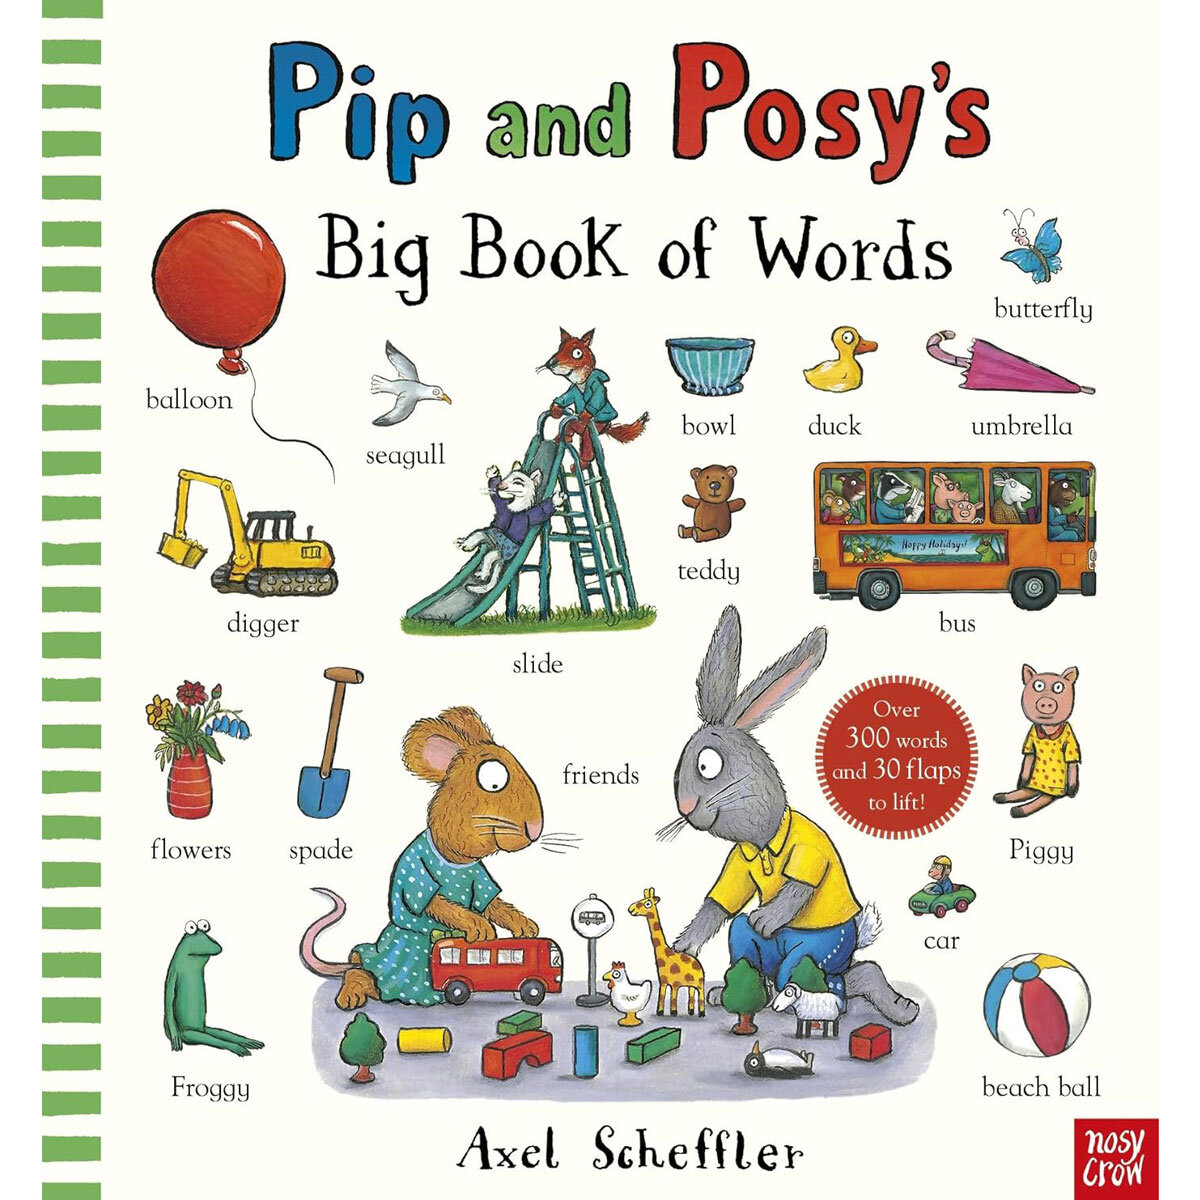 Pip and Posy's Big Book of Words by Axel Scheffler 1